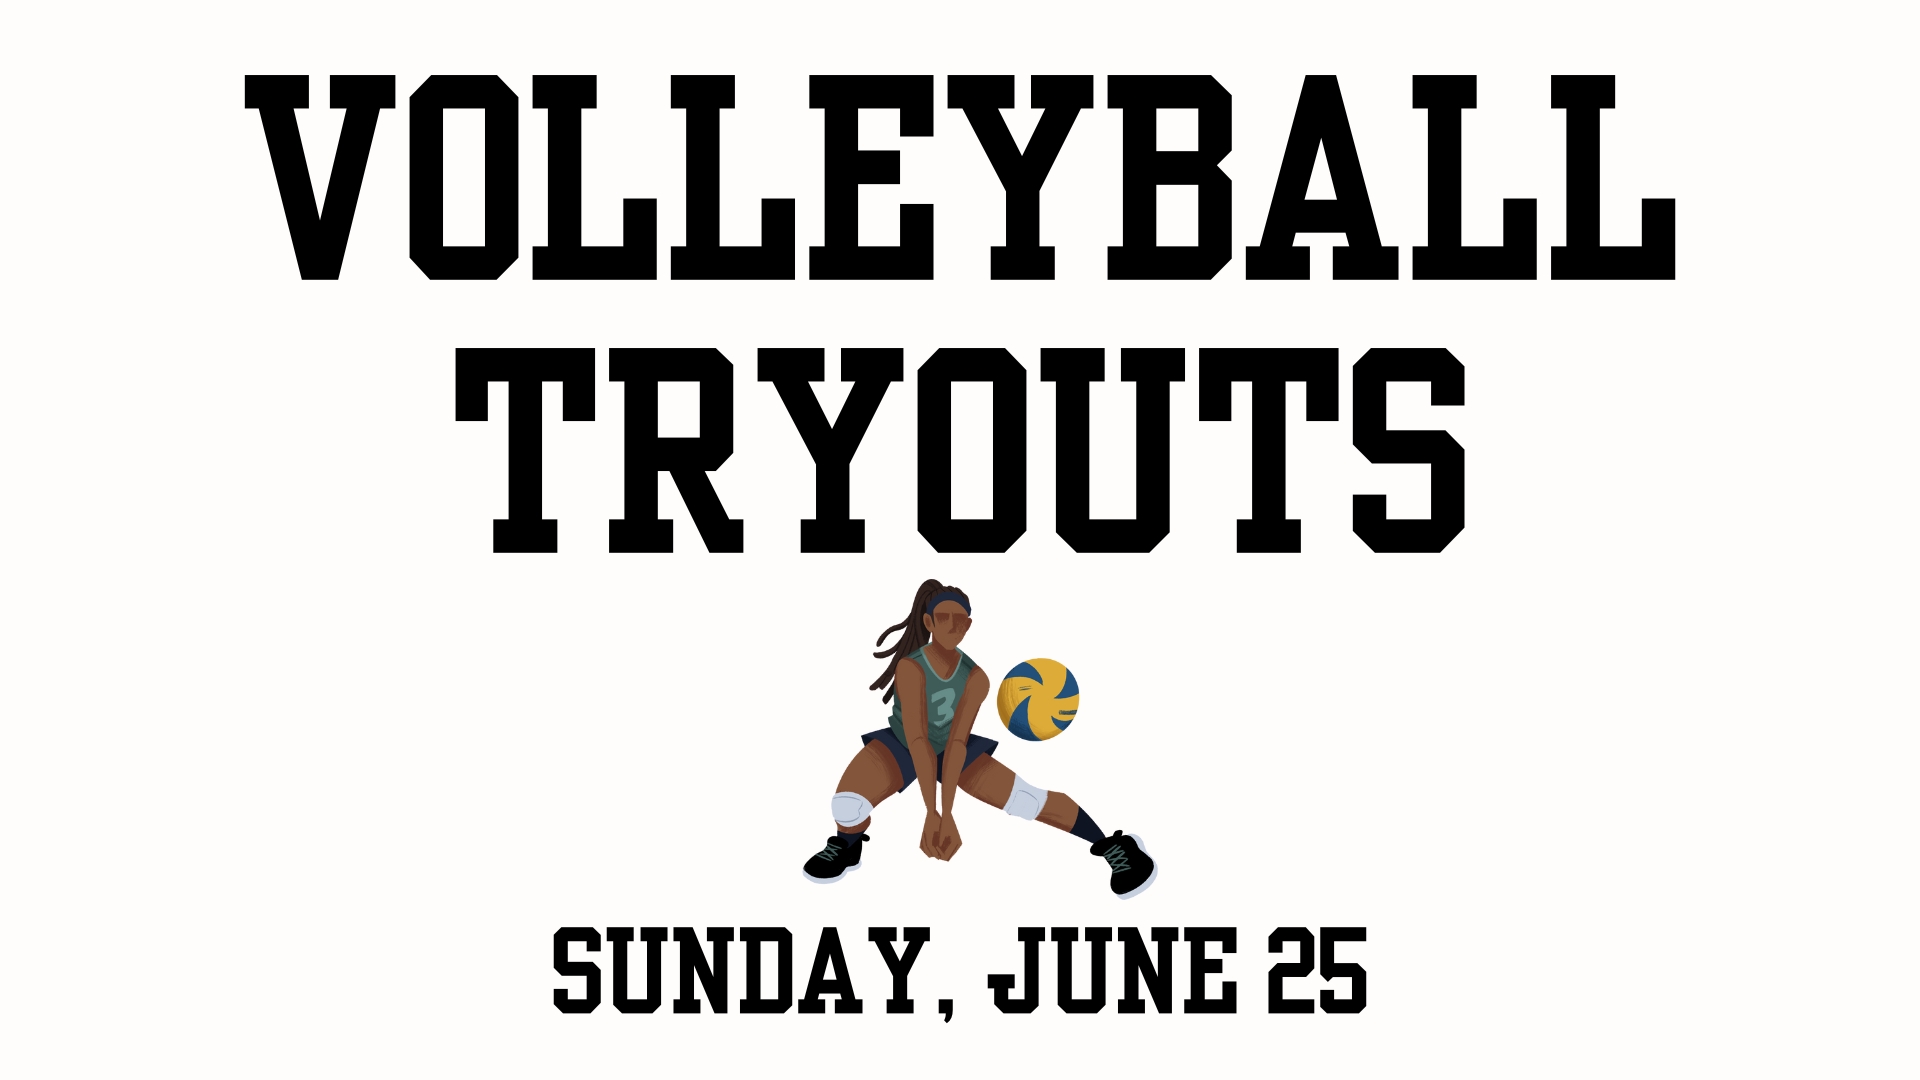 Women's Volleyball Tryouts graphic